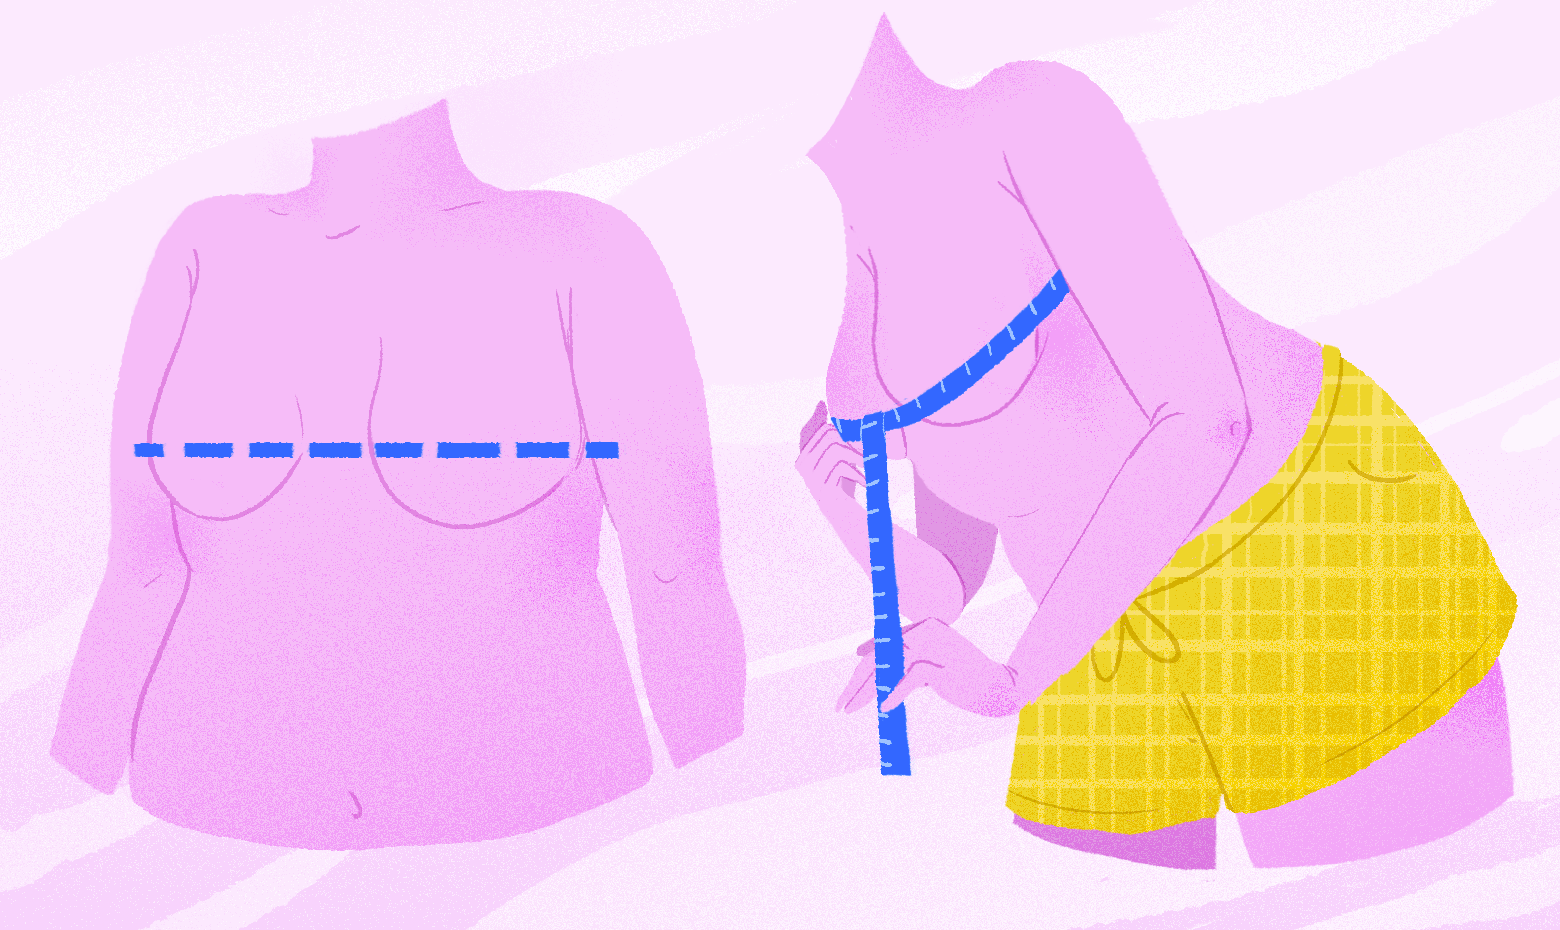 How to Measure My Bust Size 